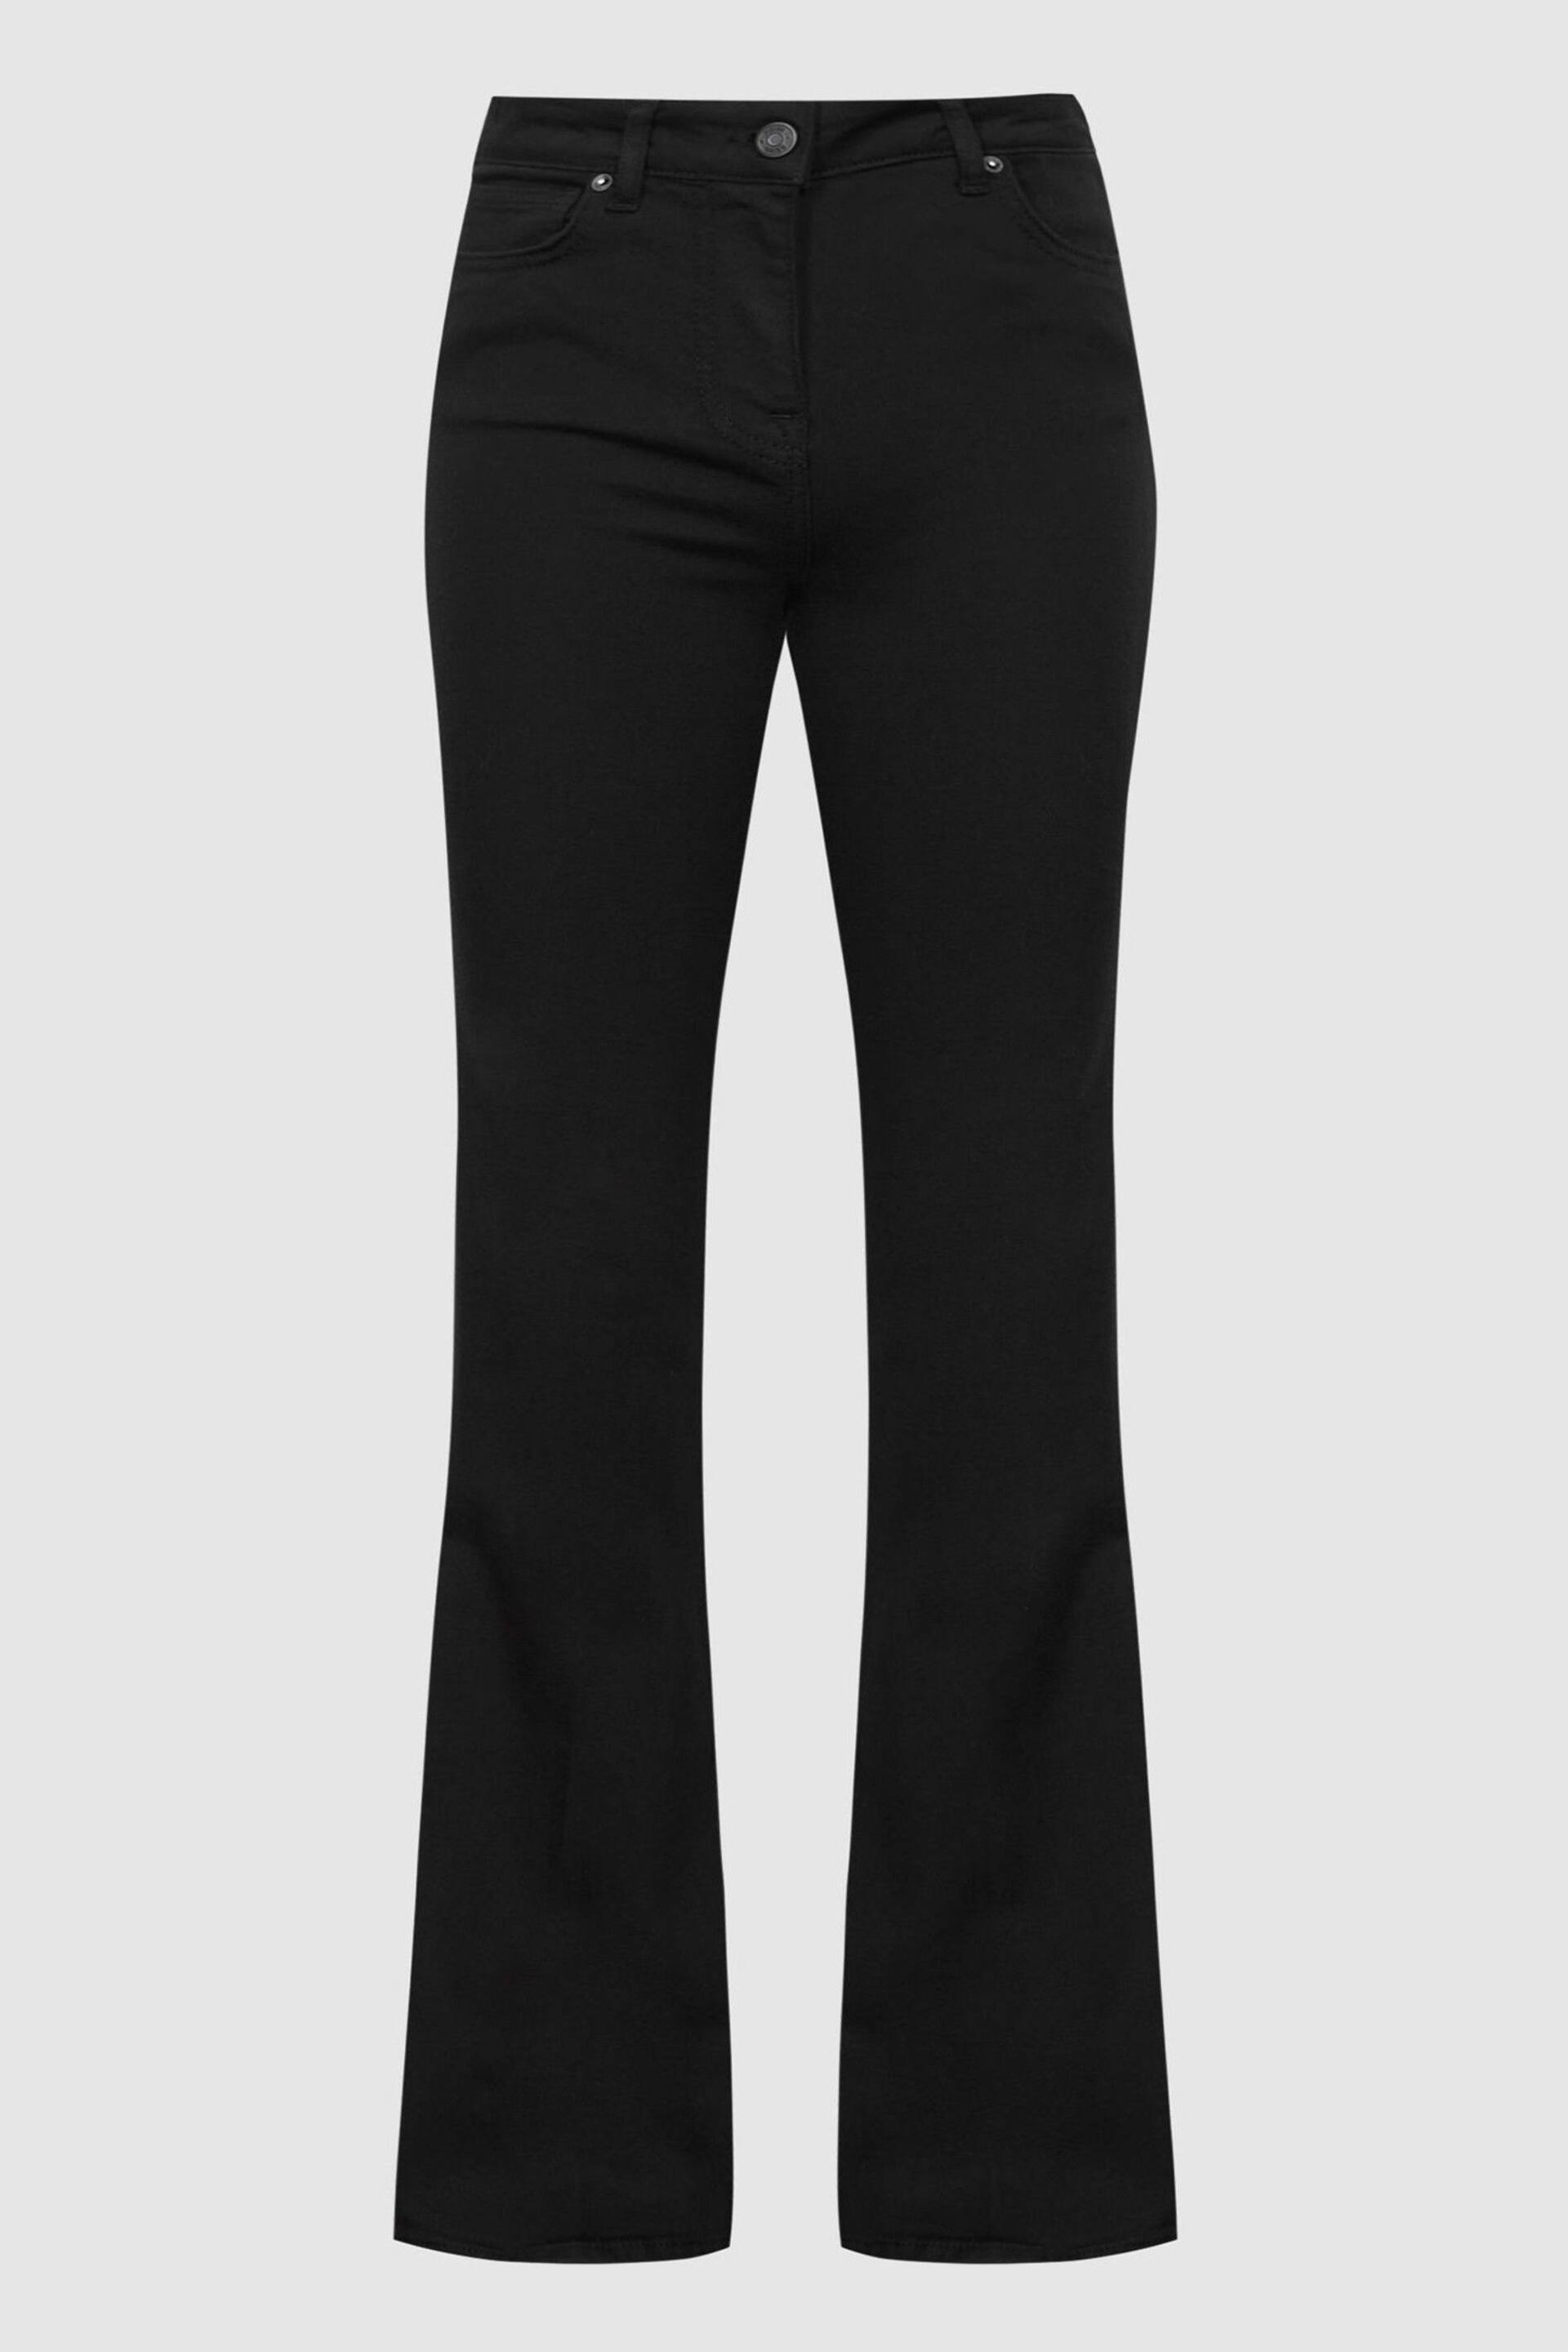 Reiss Black Beau High Rise Skinny Flared Jeans - Image 2 of 5